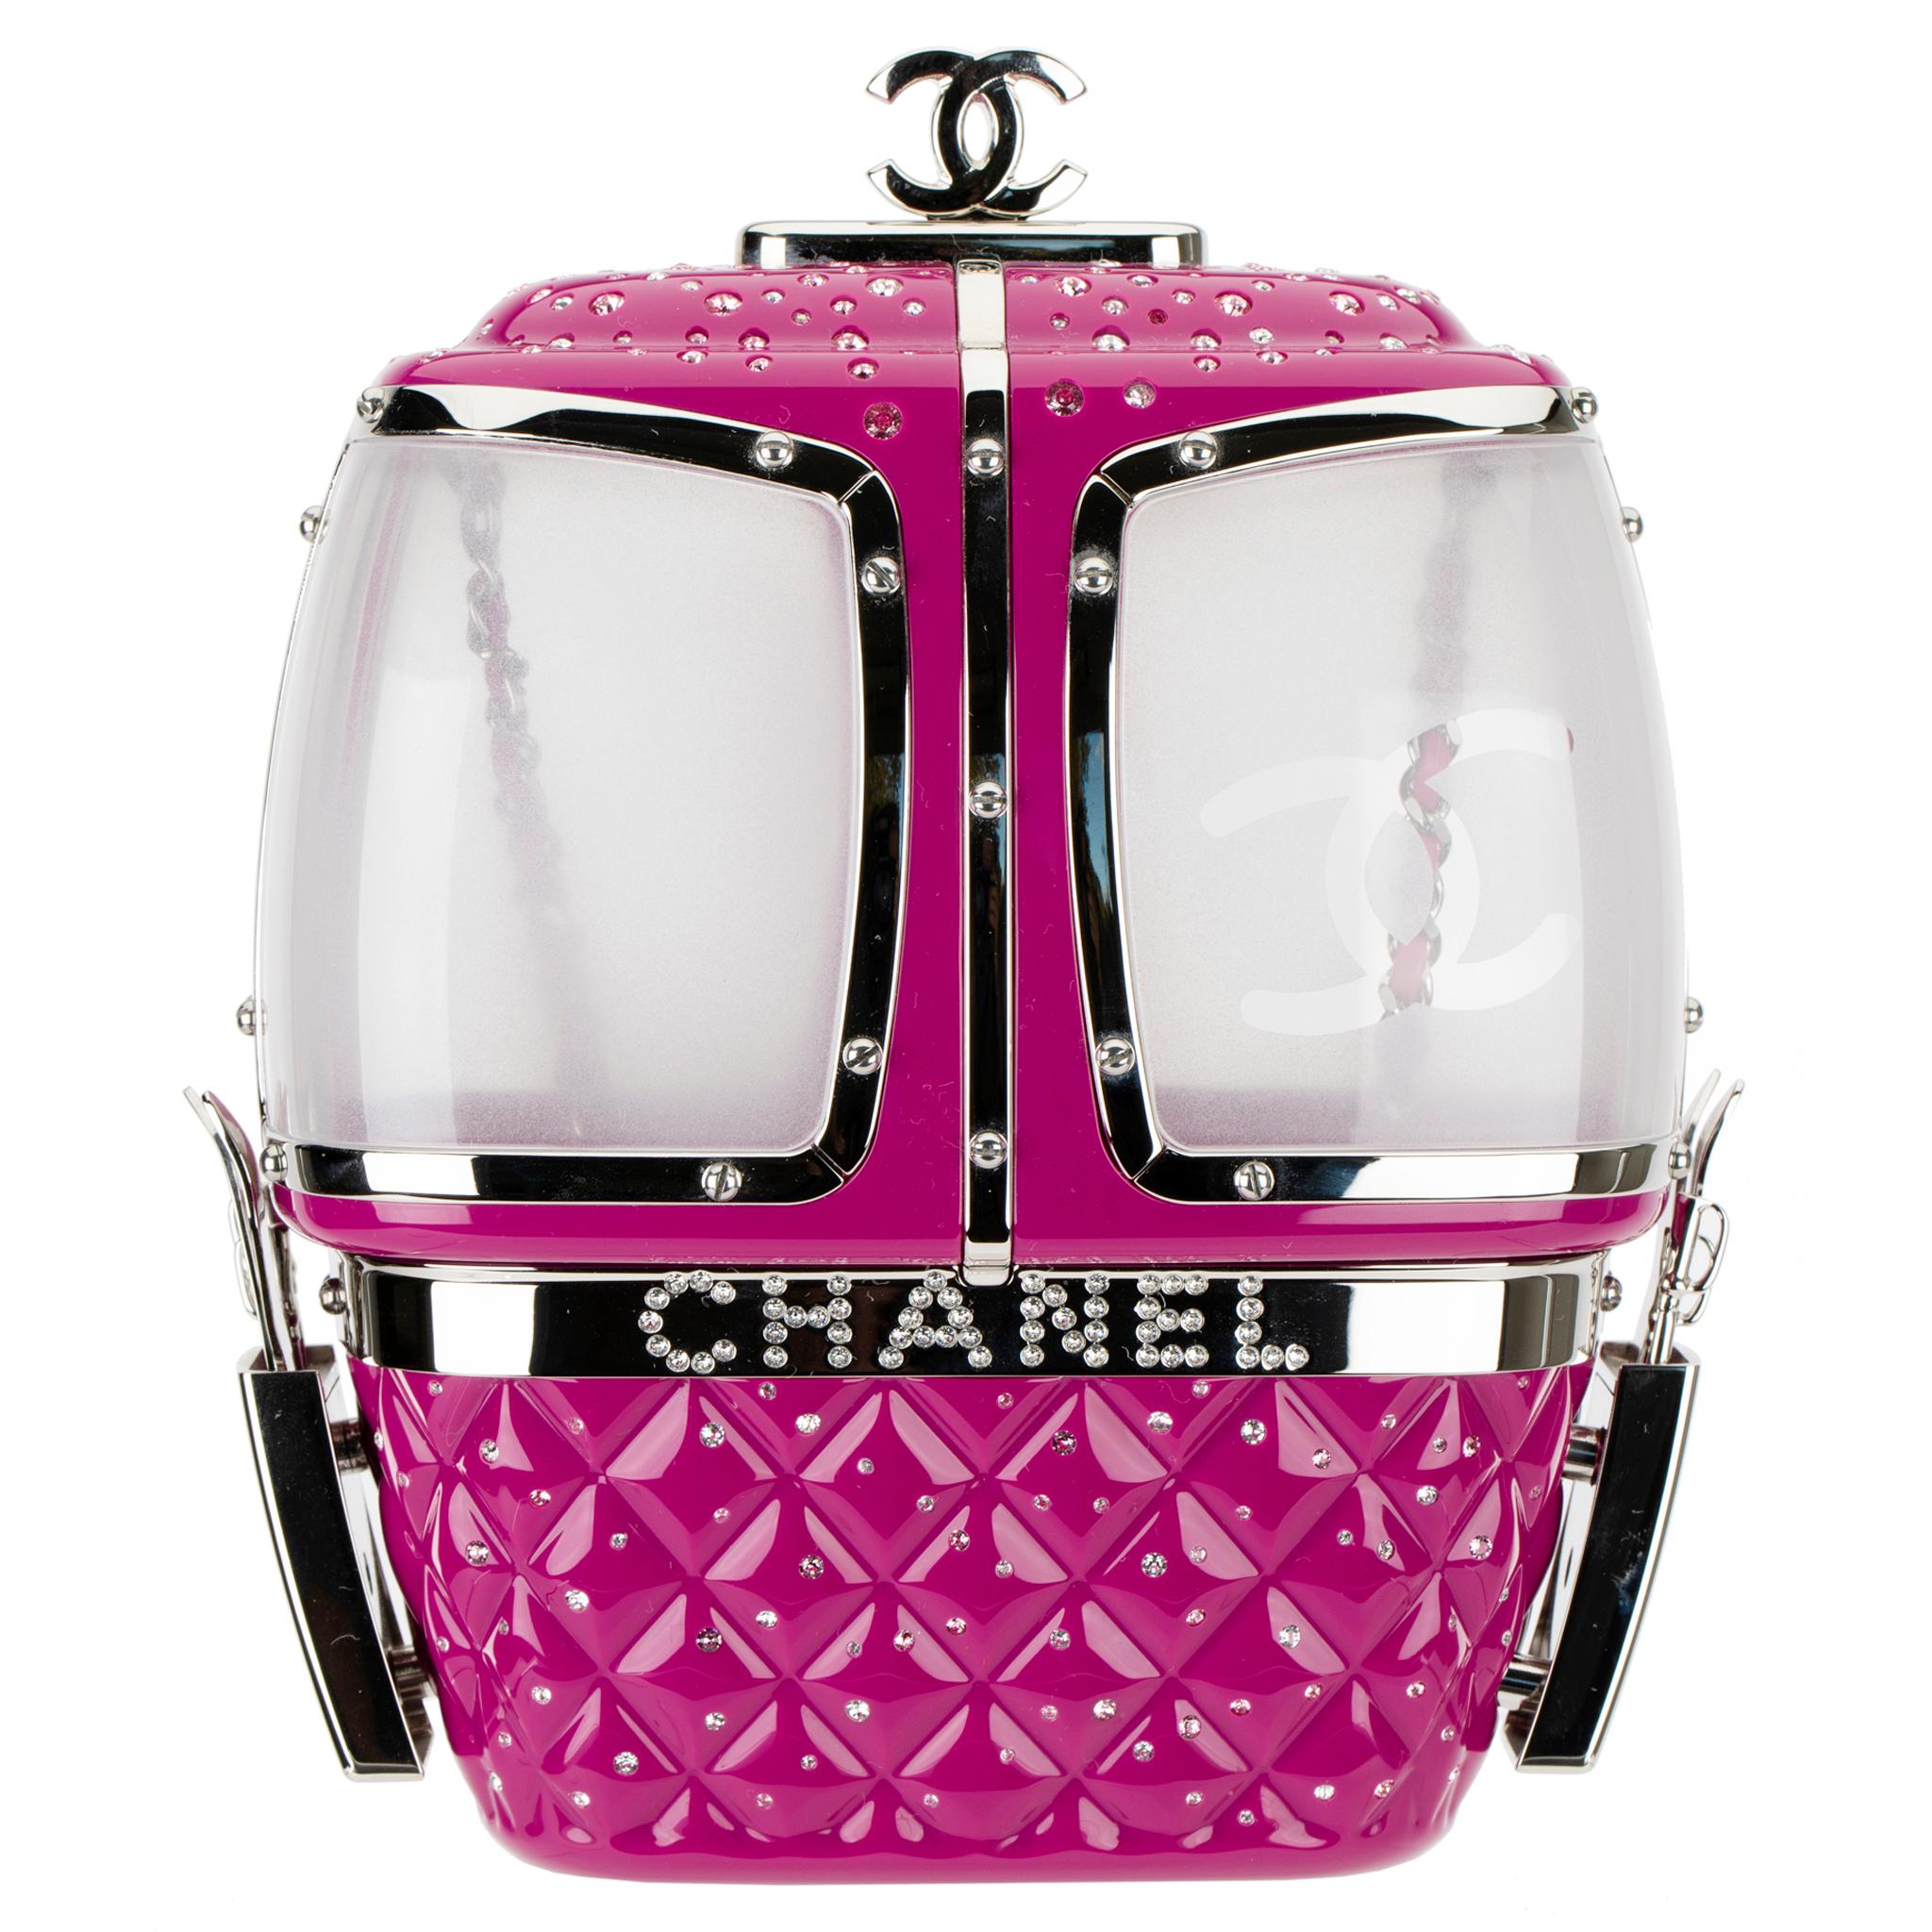 This Ski Gondola Minaudière or, more familiarly known known as a cable cars, from the ski resort themed Fall/Winter 2019 collection is made from fuchsia lucite, with silver tone hardware and rhinestones decorated throughout. Look closely, and you’ll